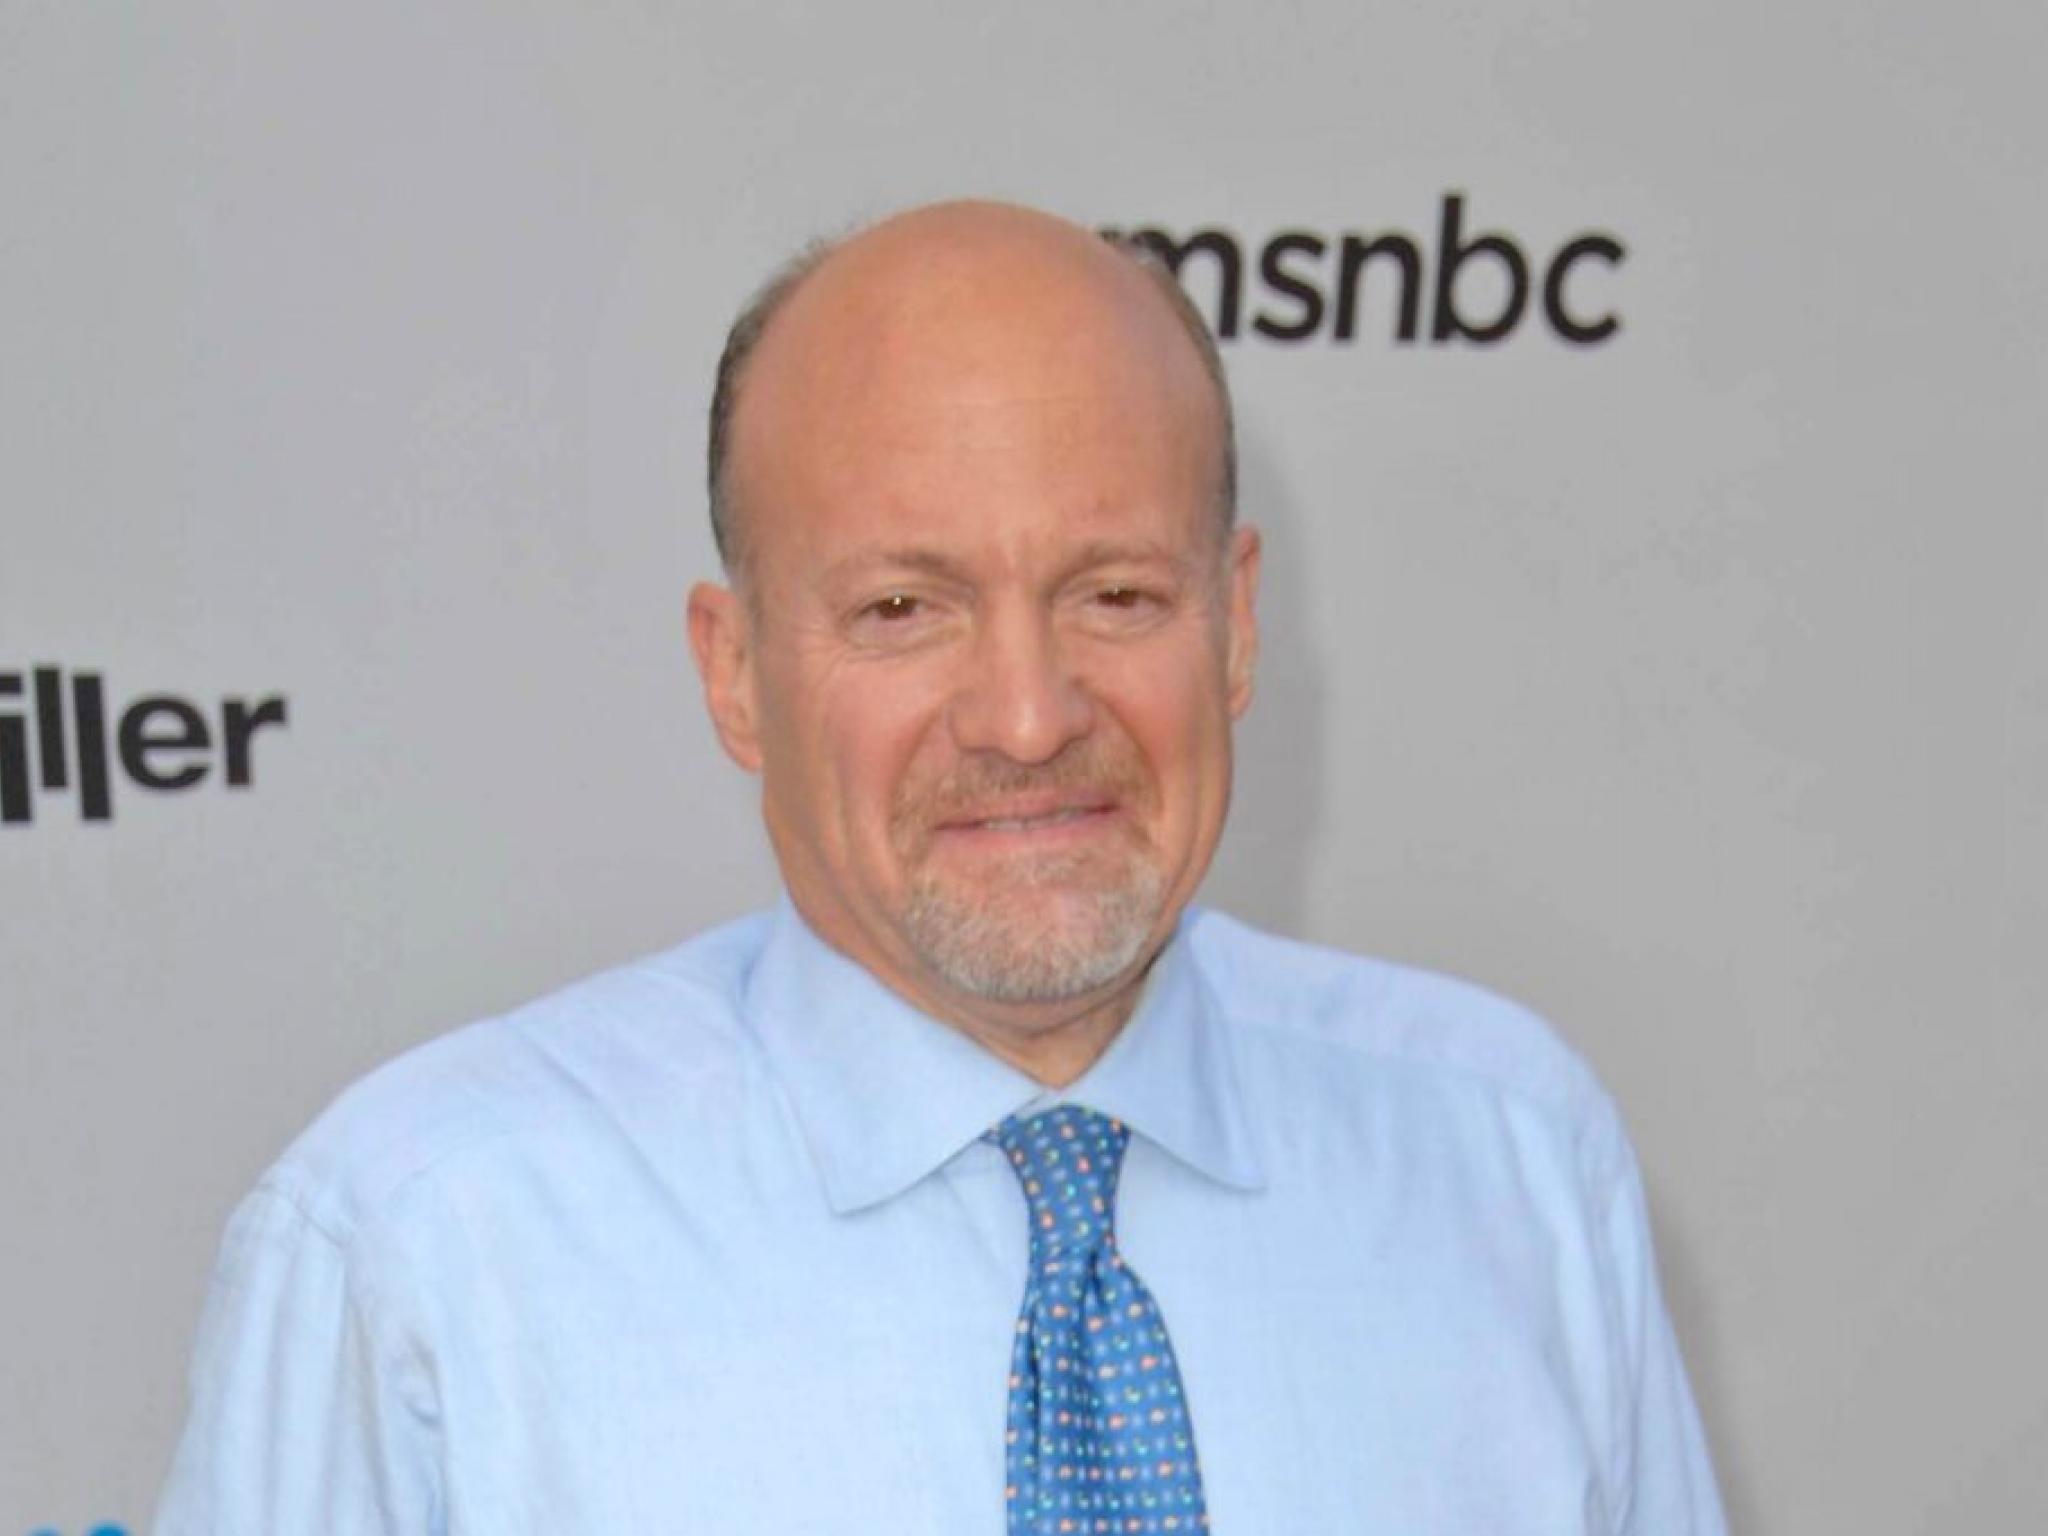  jim-cramer-slams-analysts-over-getting-china-wrong-about-apple-for-two-decades-thats-why-i-am-always-trashing-you 